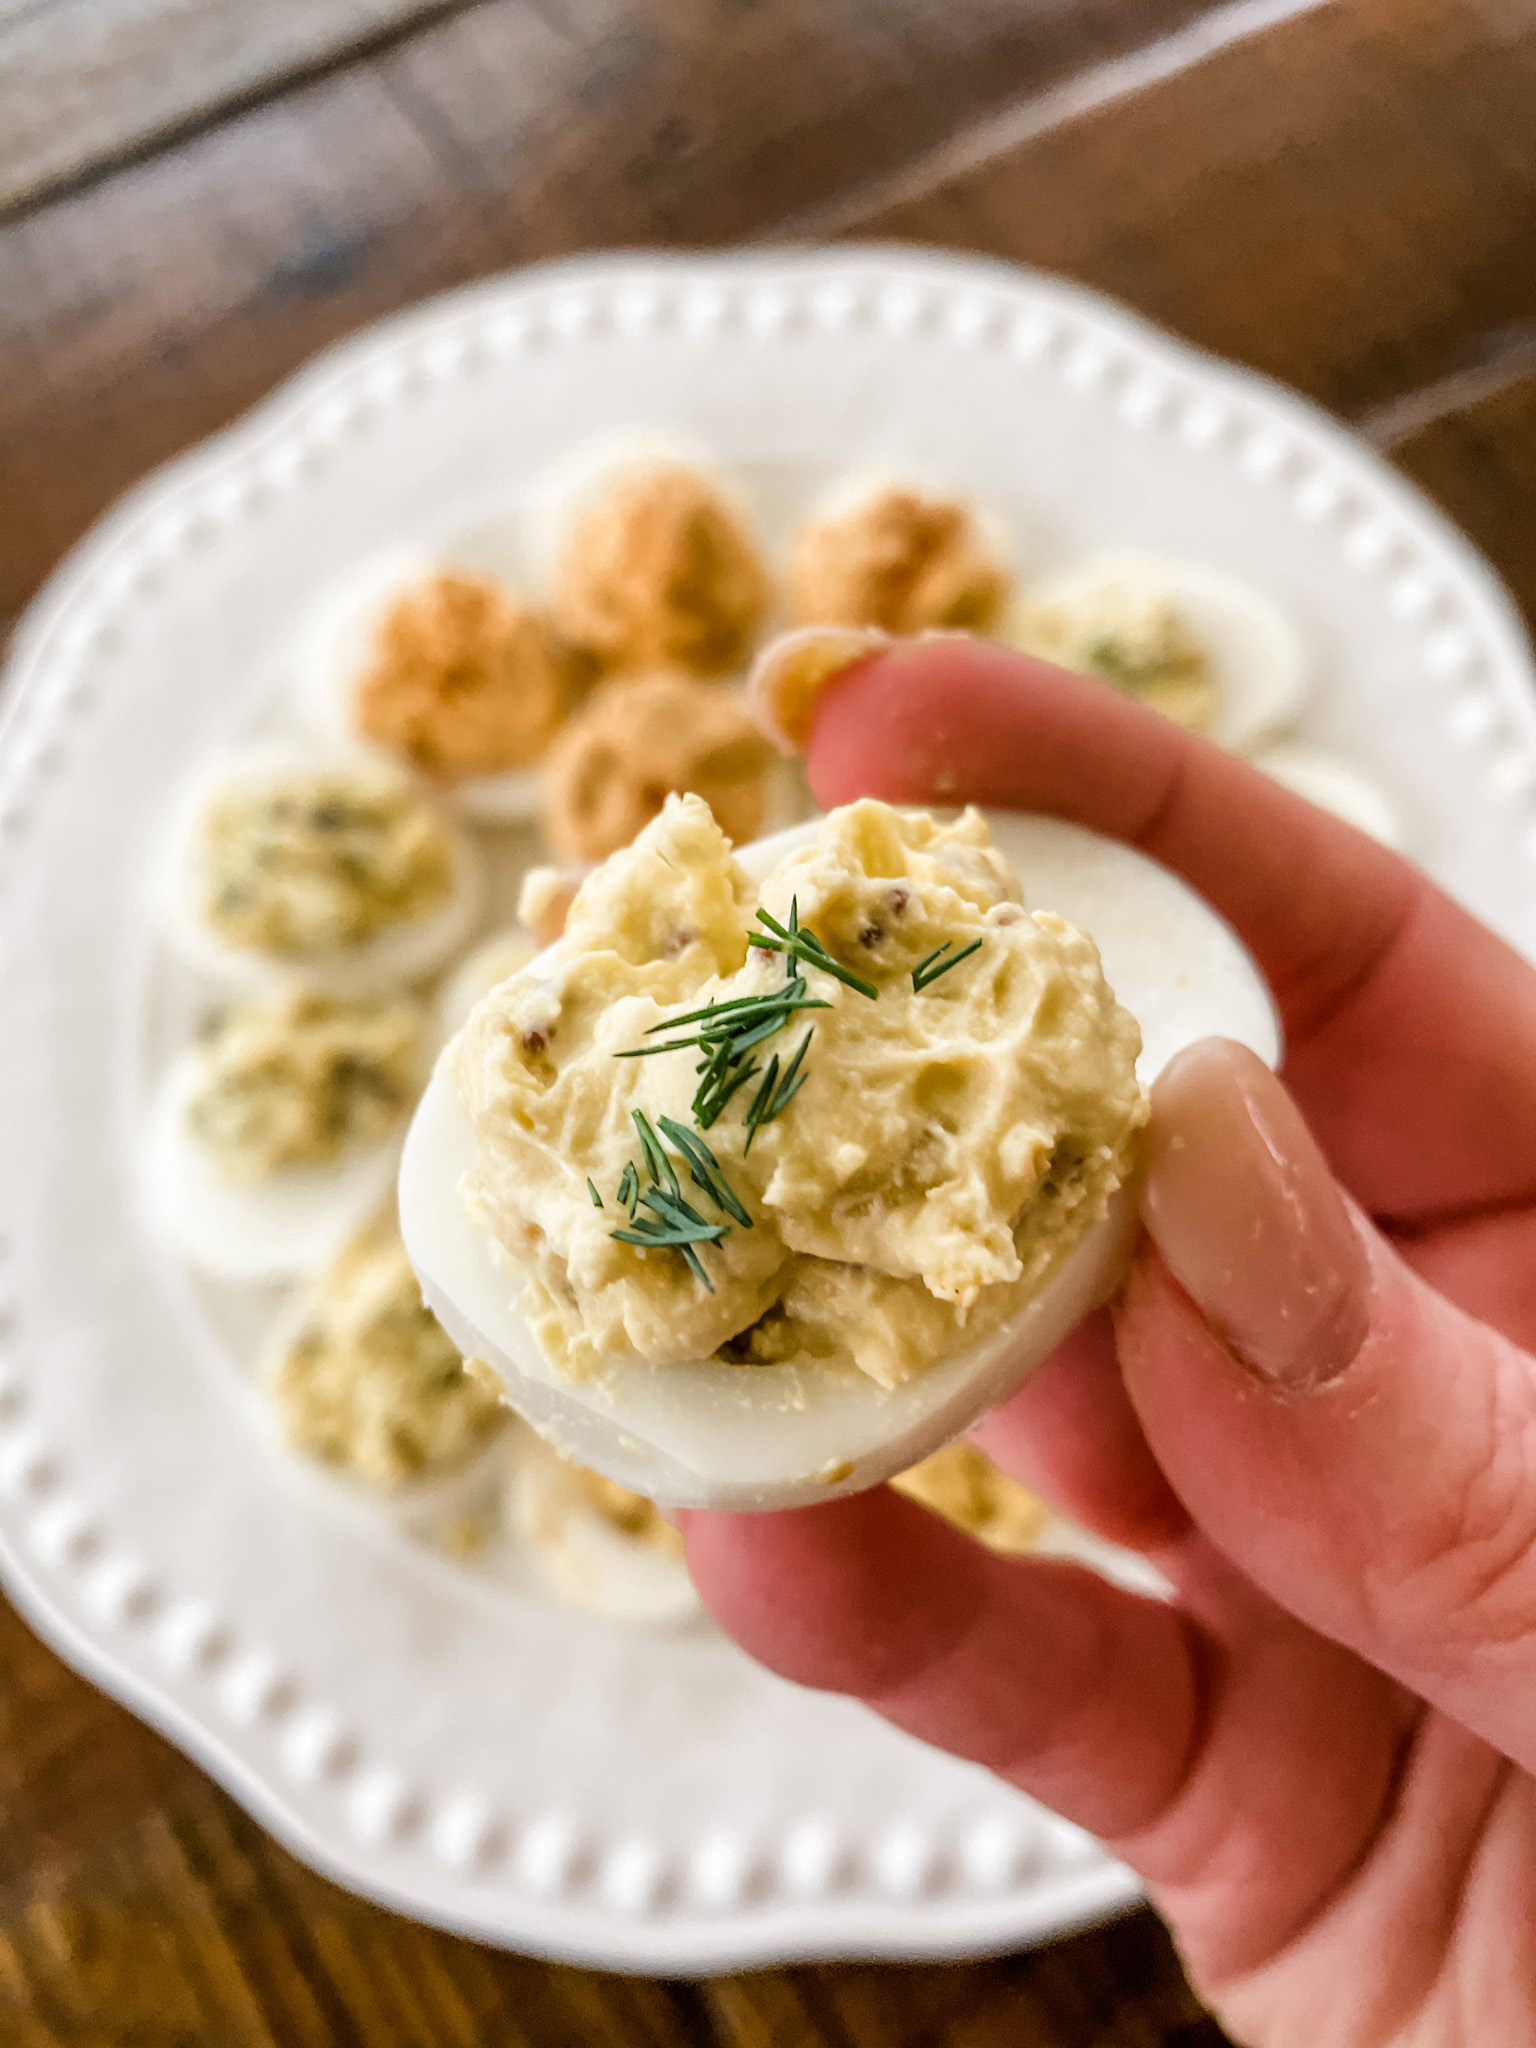 A hand holding up the dill lighter deviled eggs